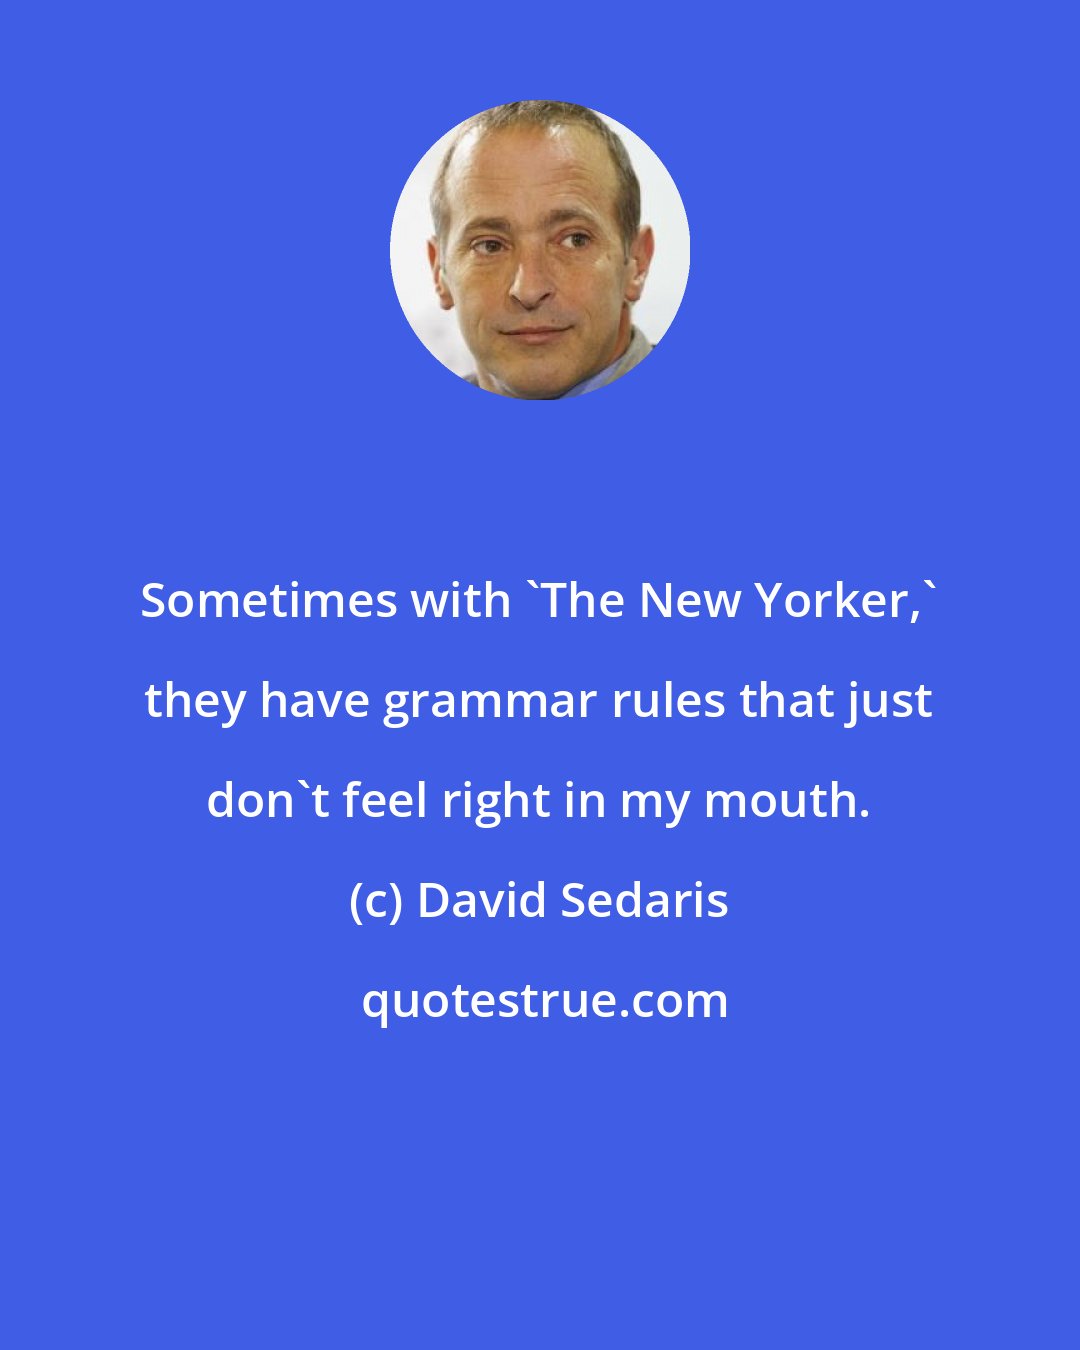 David Sedaris: Sometimes with 'The New Yorker,' they have grammar rules that just don't feel right in my mouth.